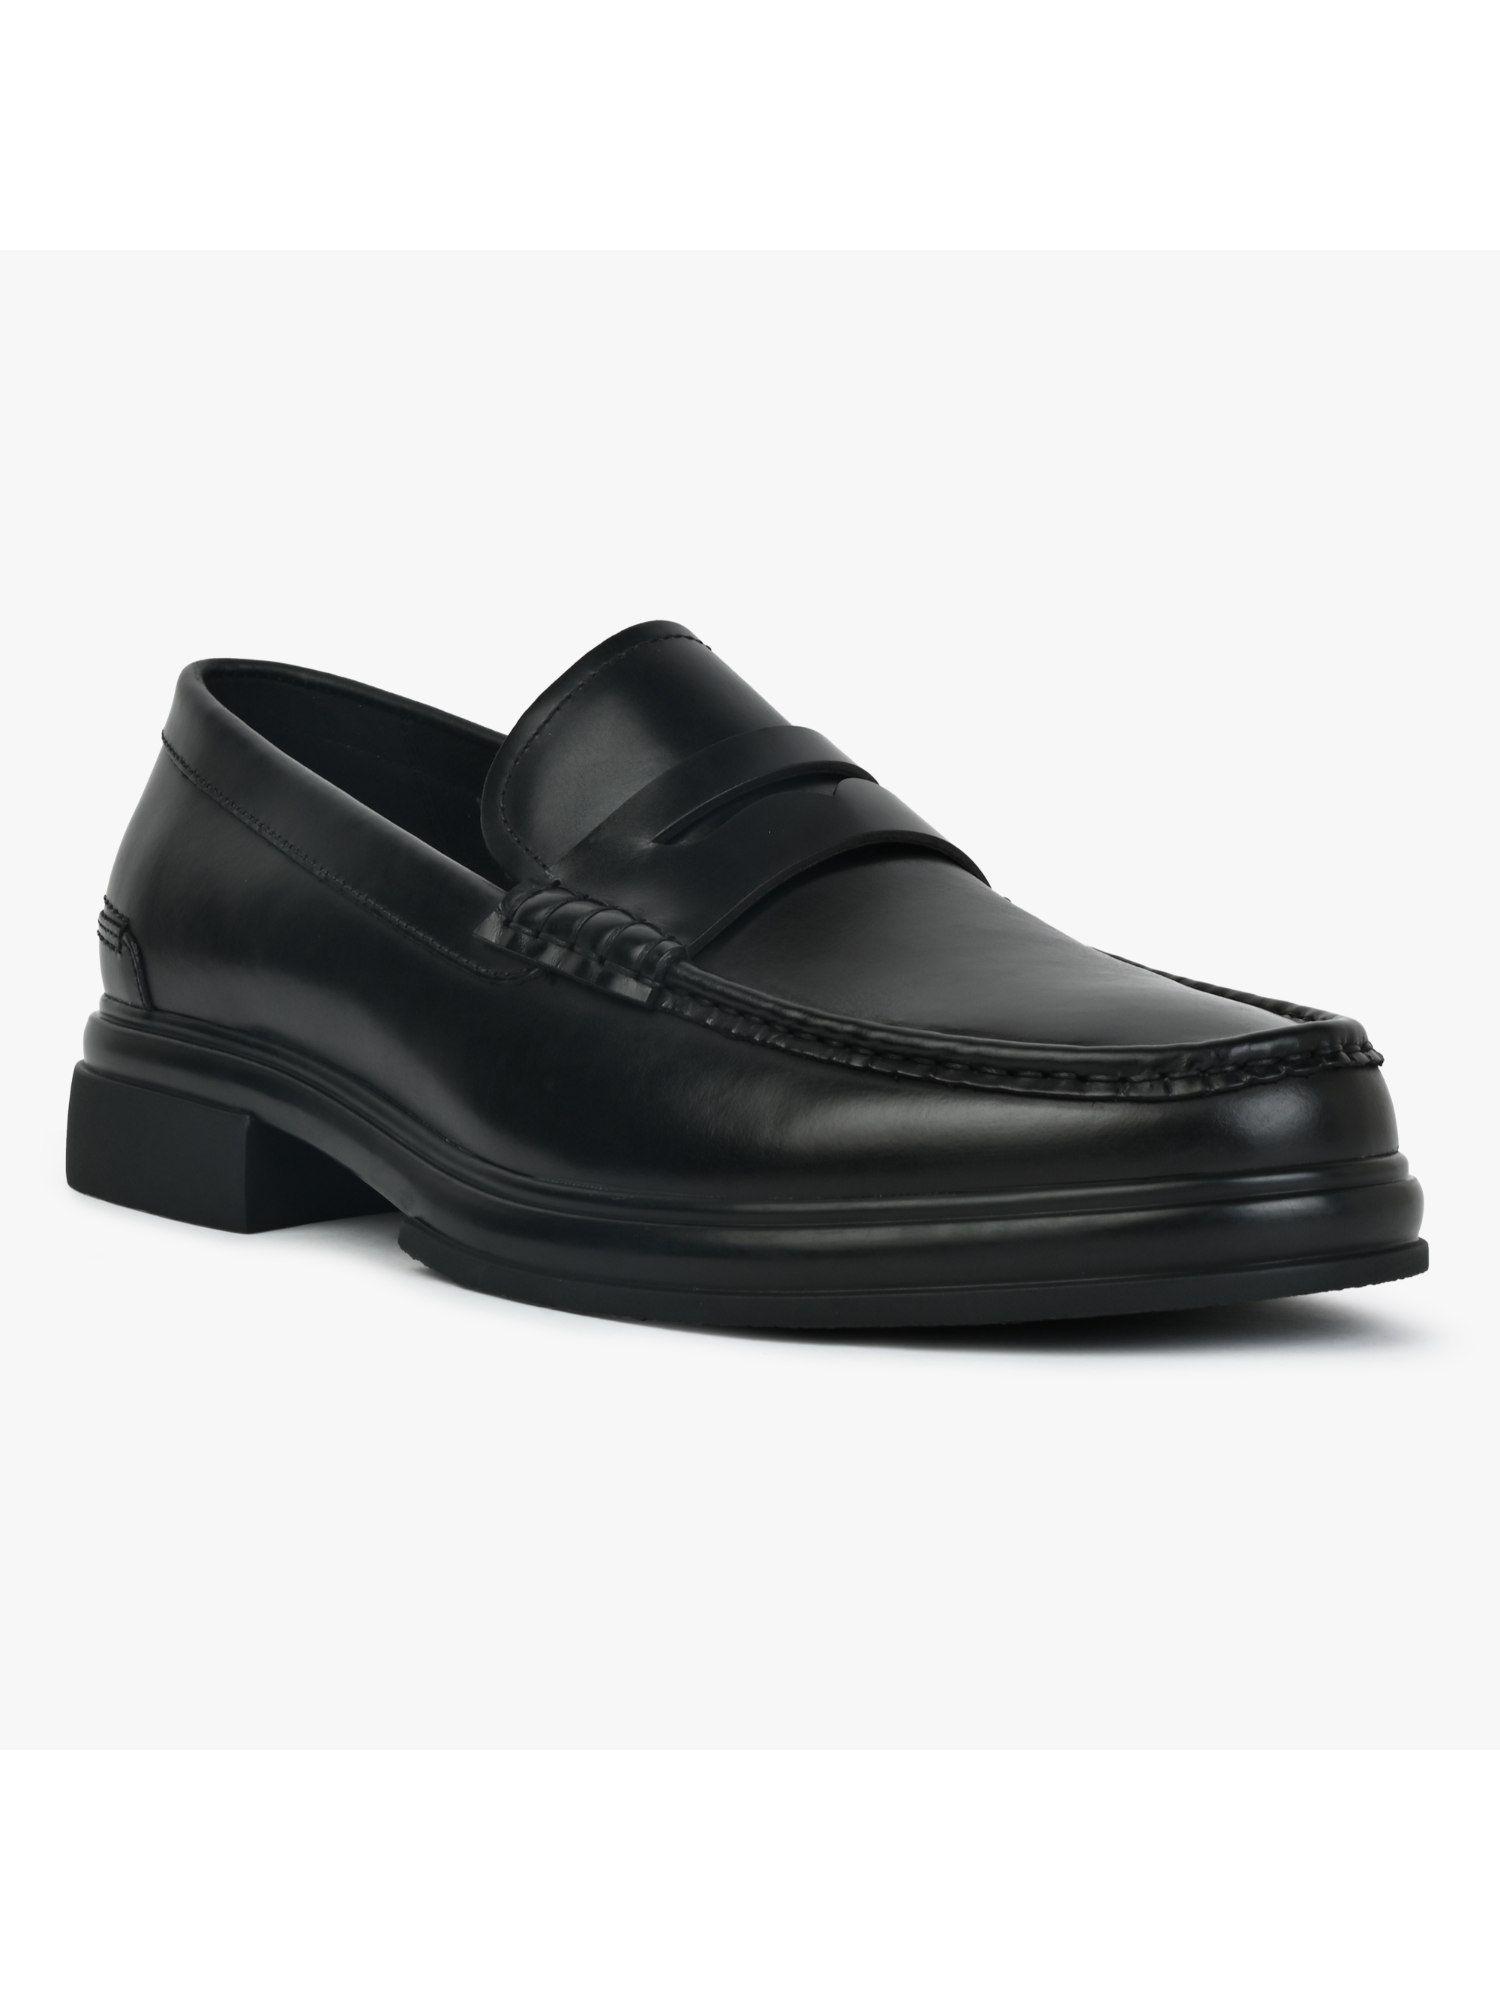 tucker001 black leather formal loafers